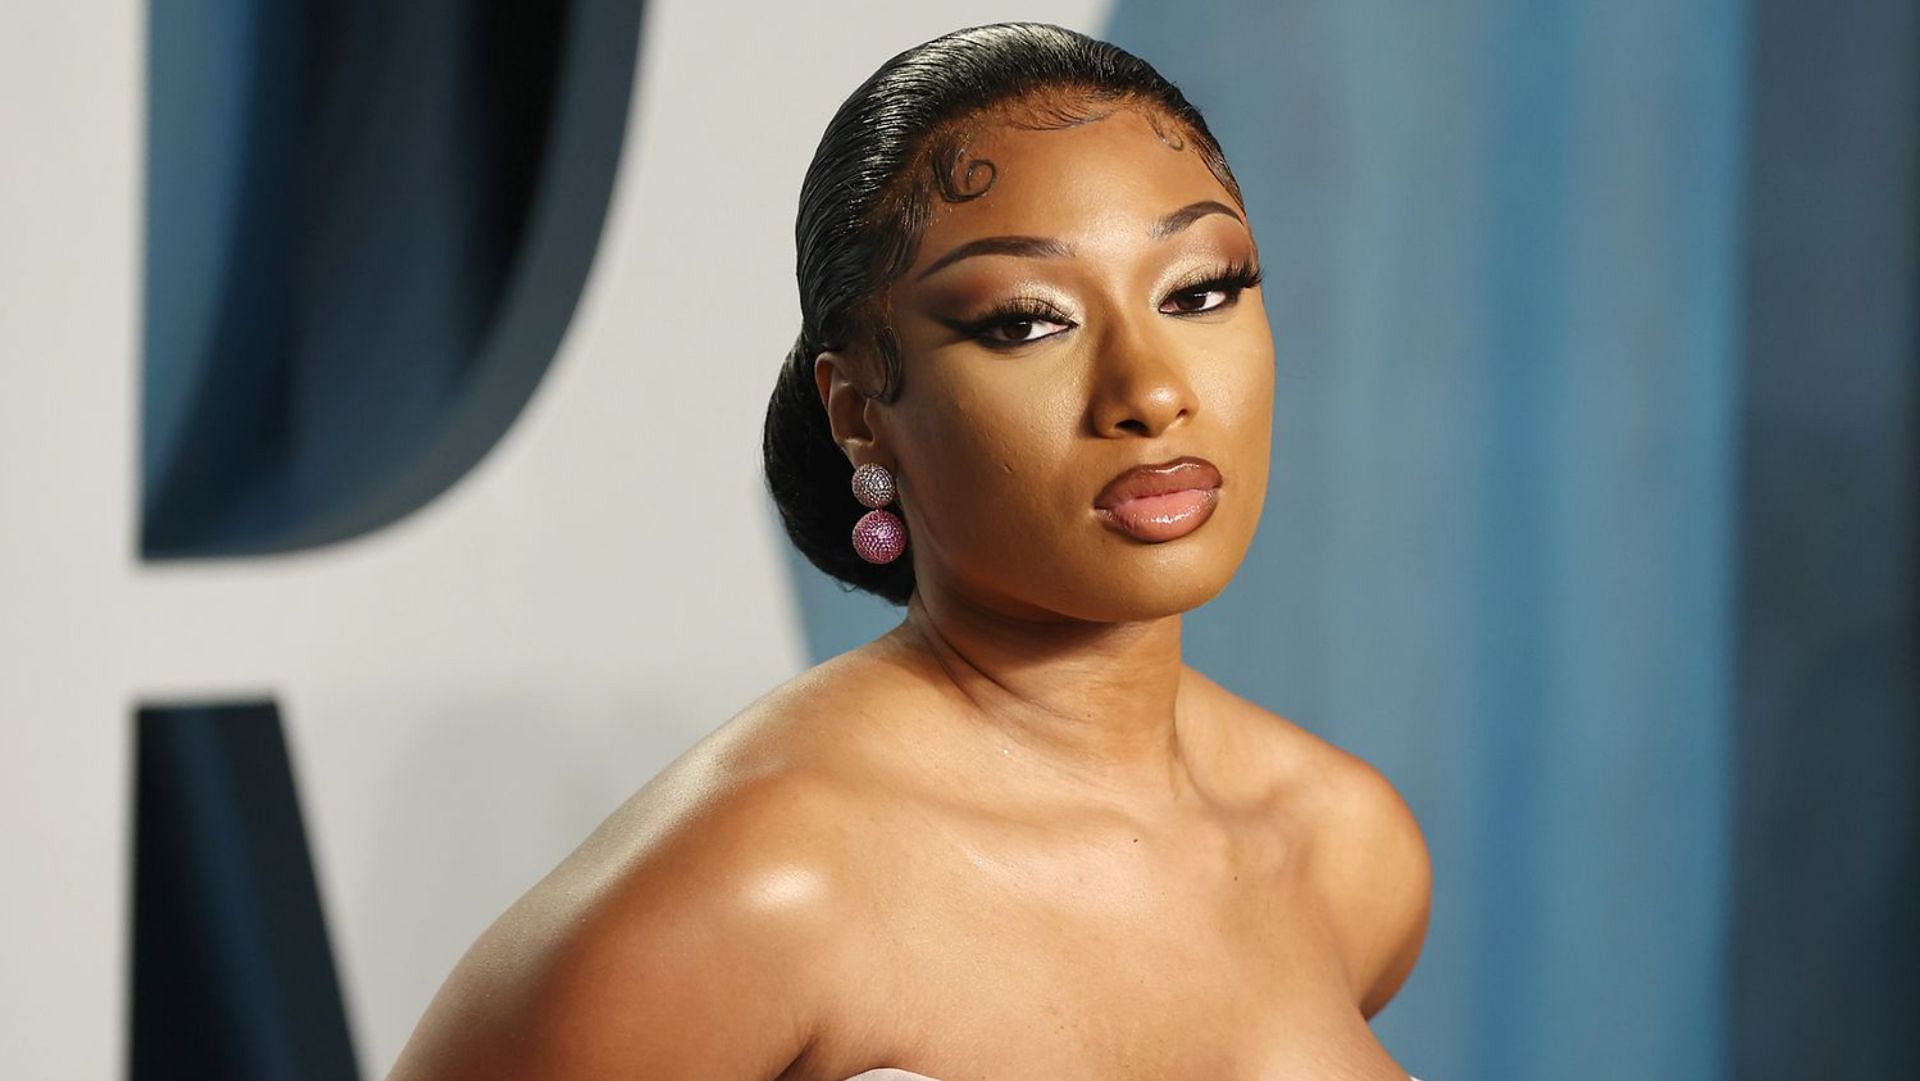 Megan Thee Stallion sustained injuries on her foot. (Image via Getty Images)